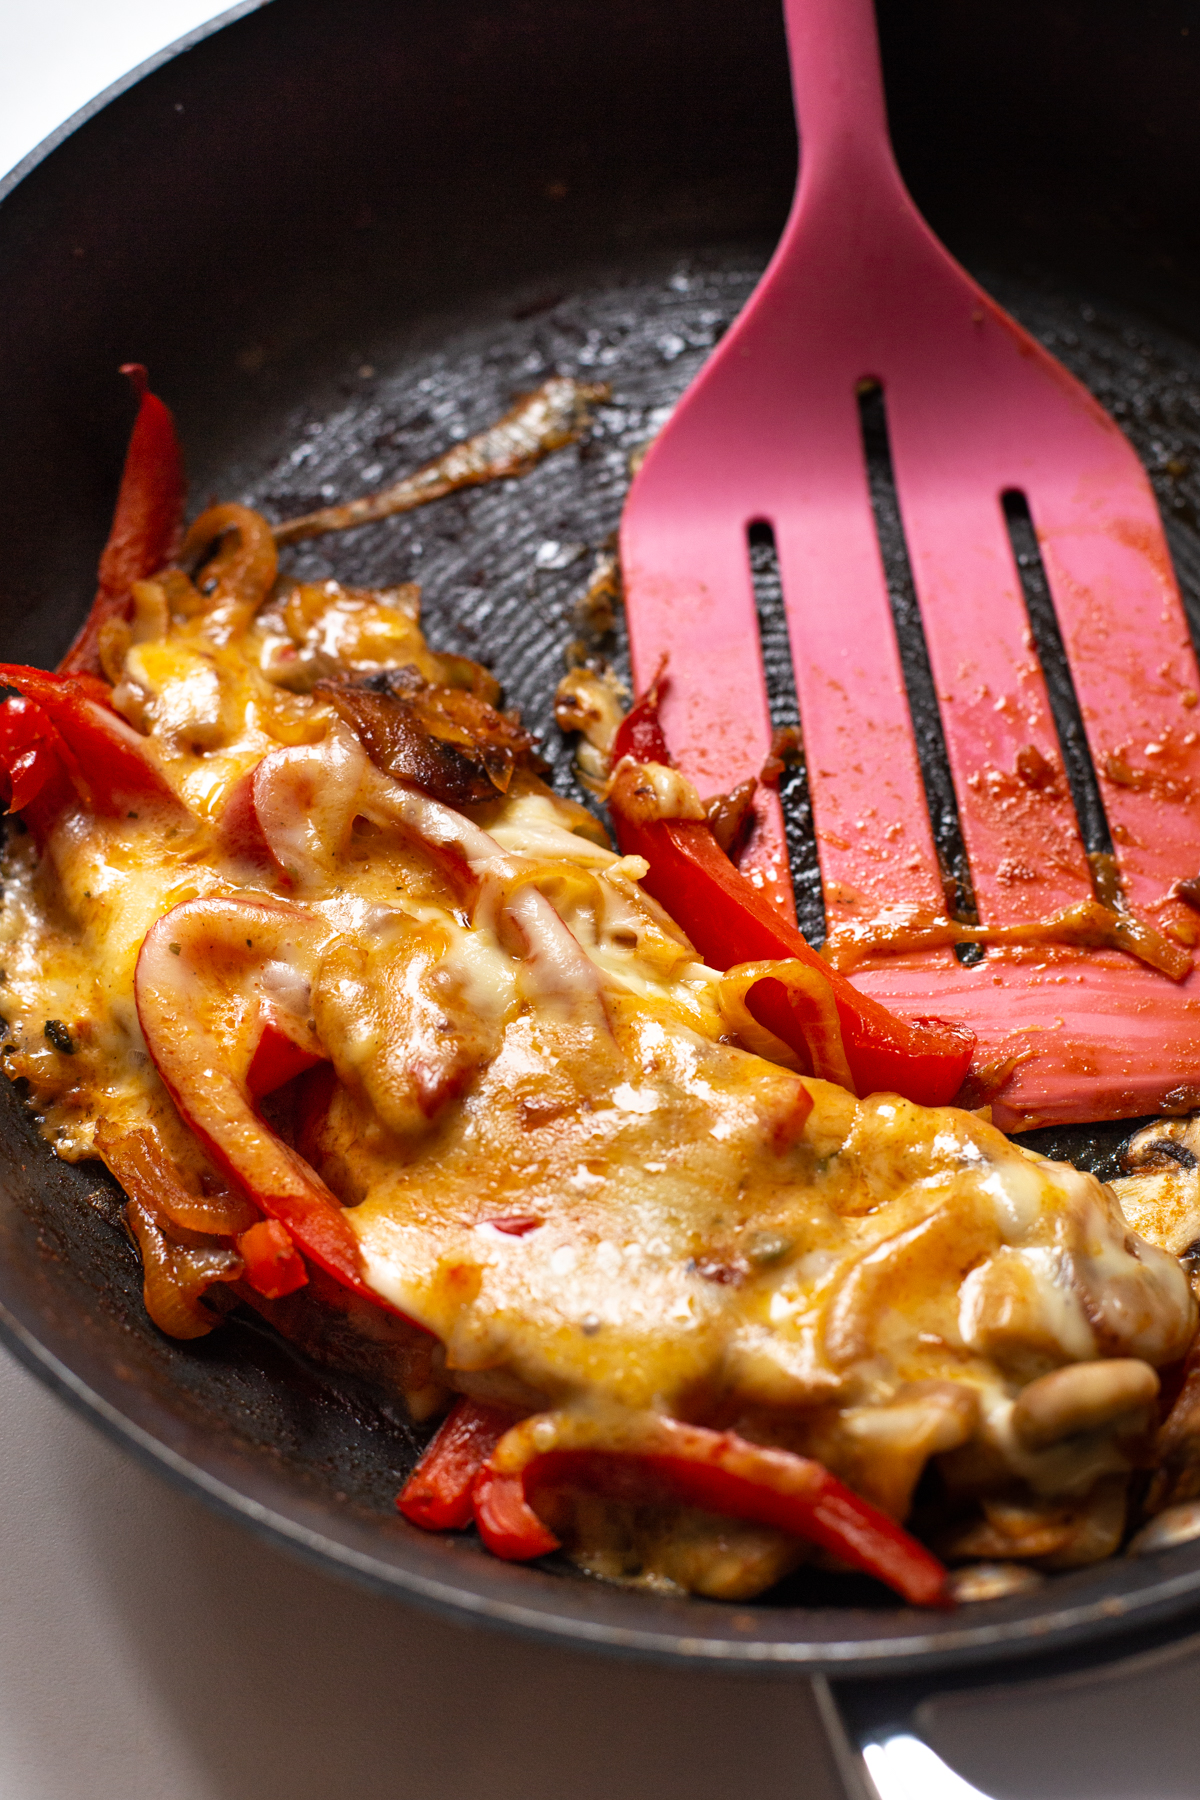 Sautéed vegetables topped with melted cheese in a frying pan.